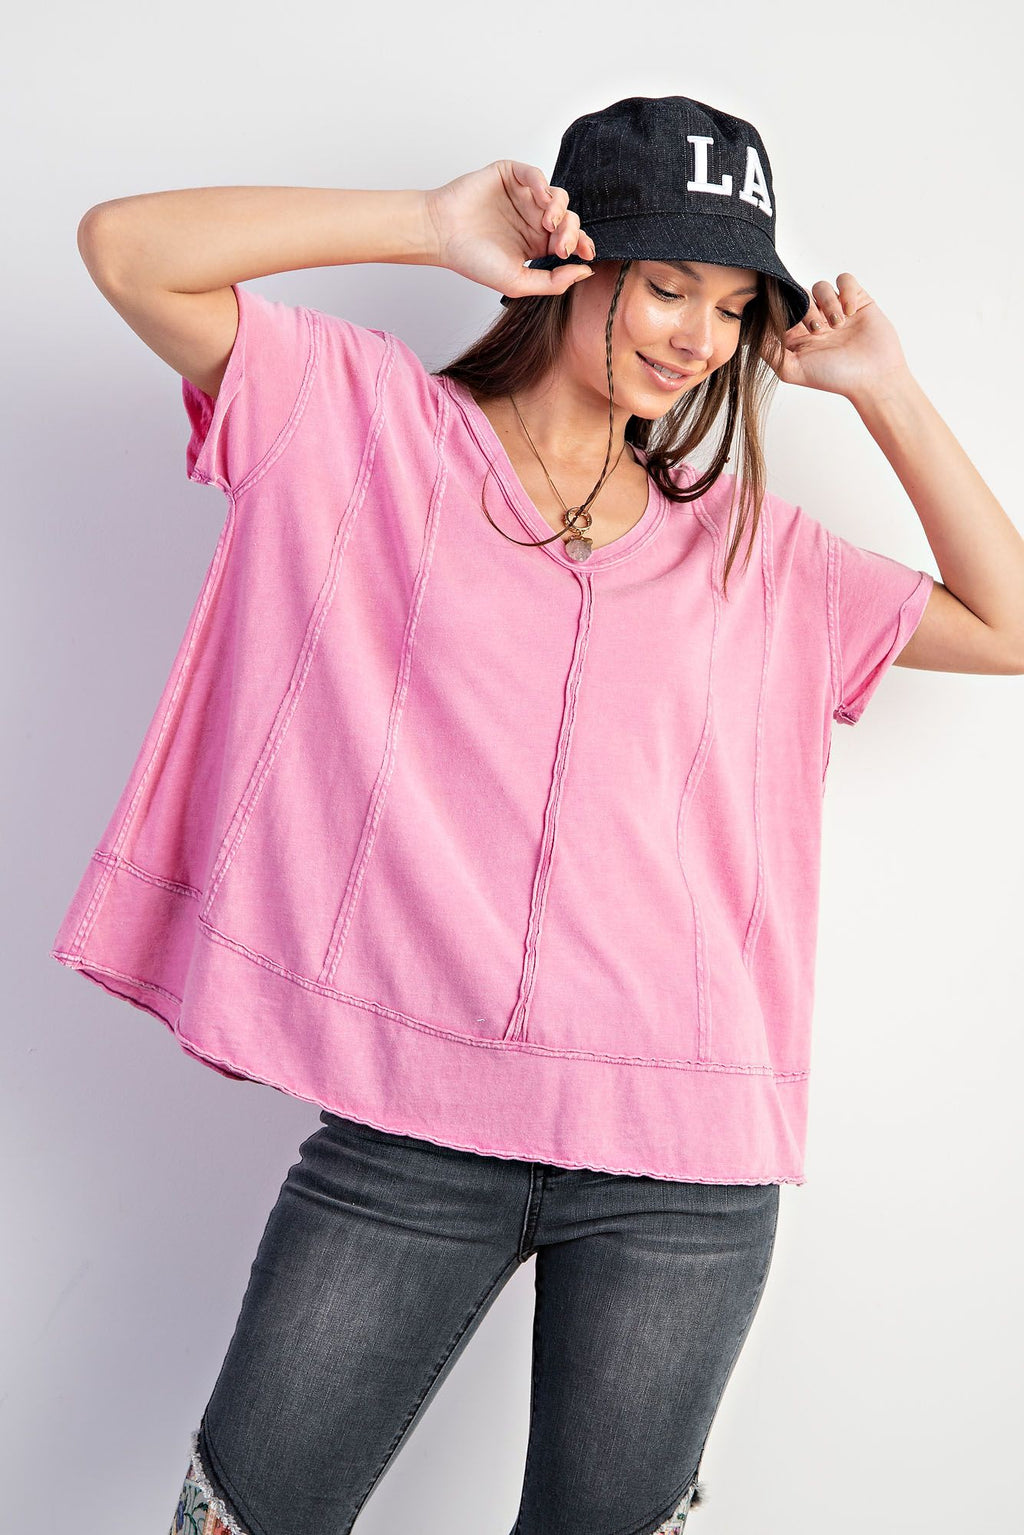 Do Your Thing Pink Cotton Slub Mineral Washed Knit Top